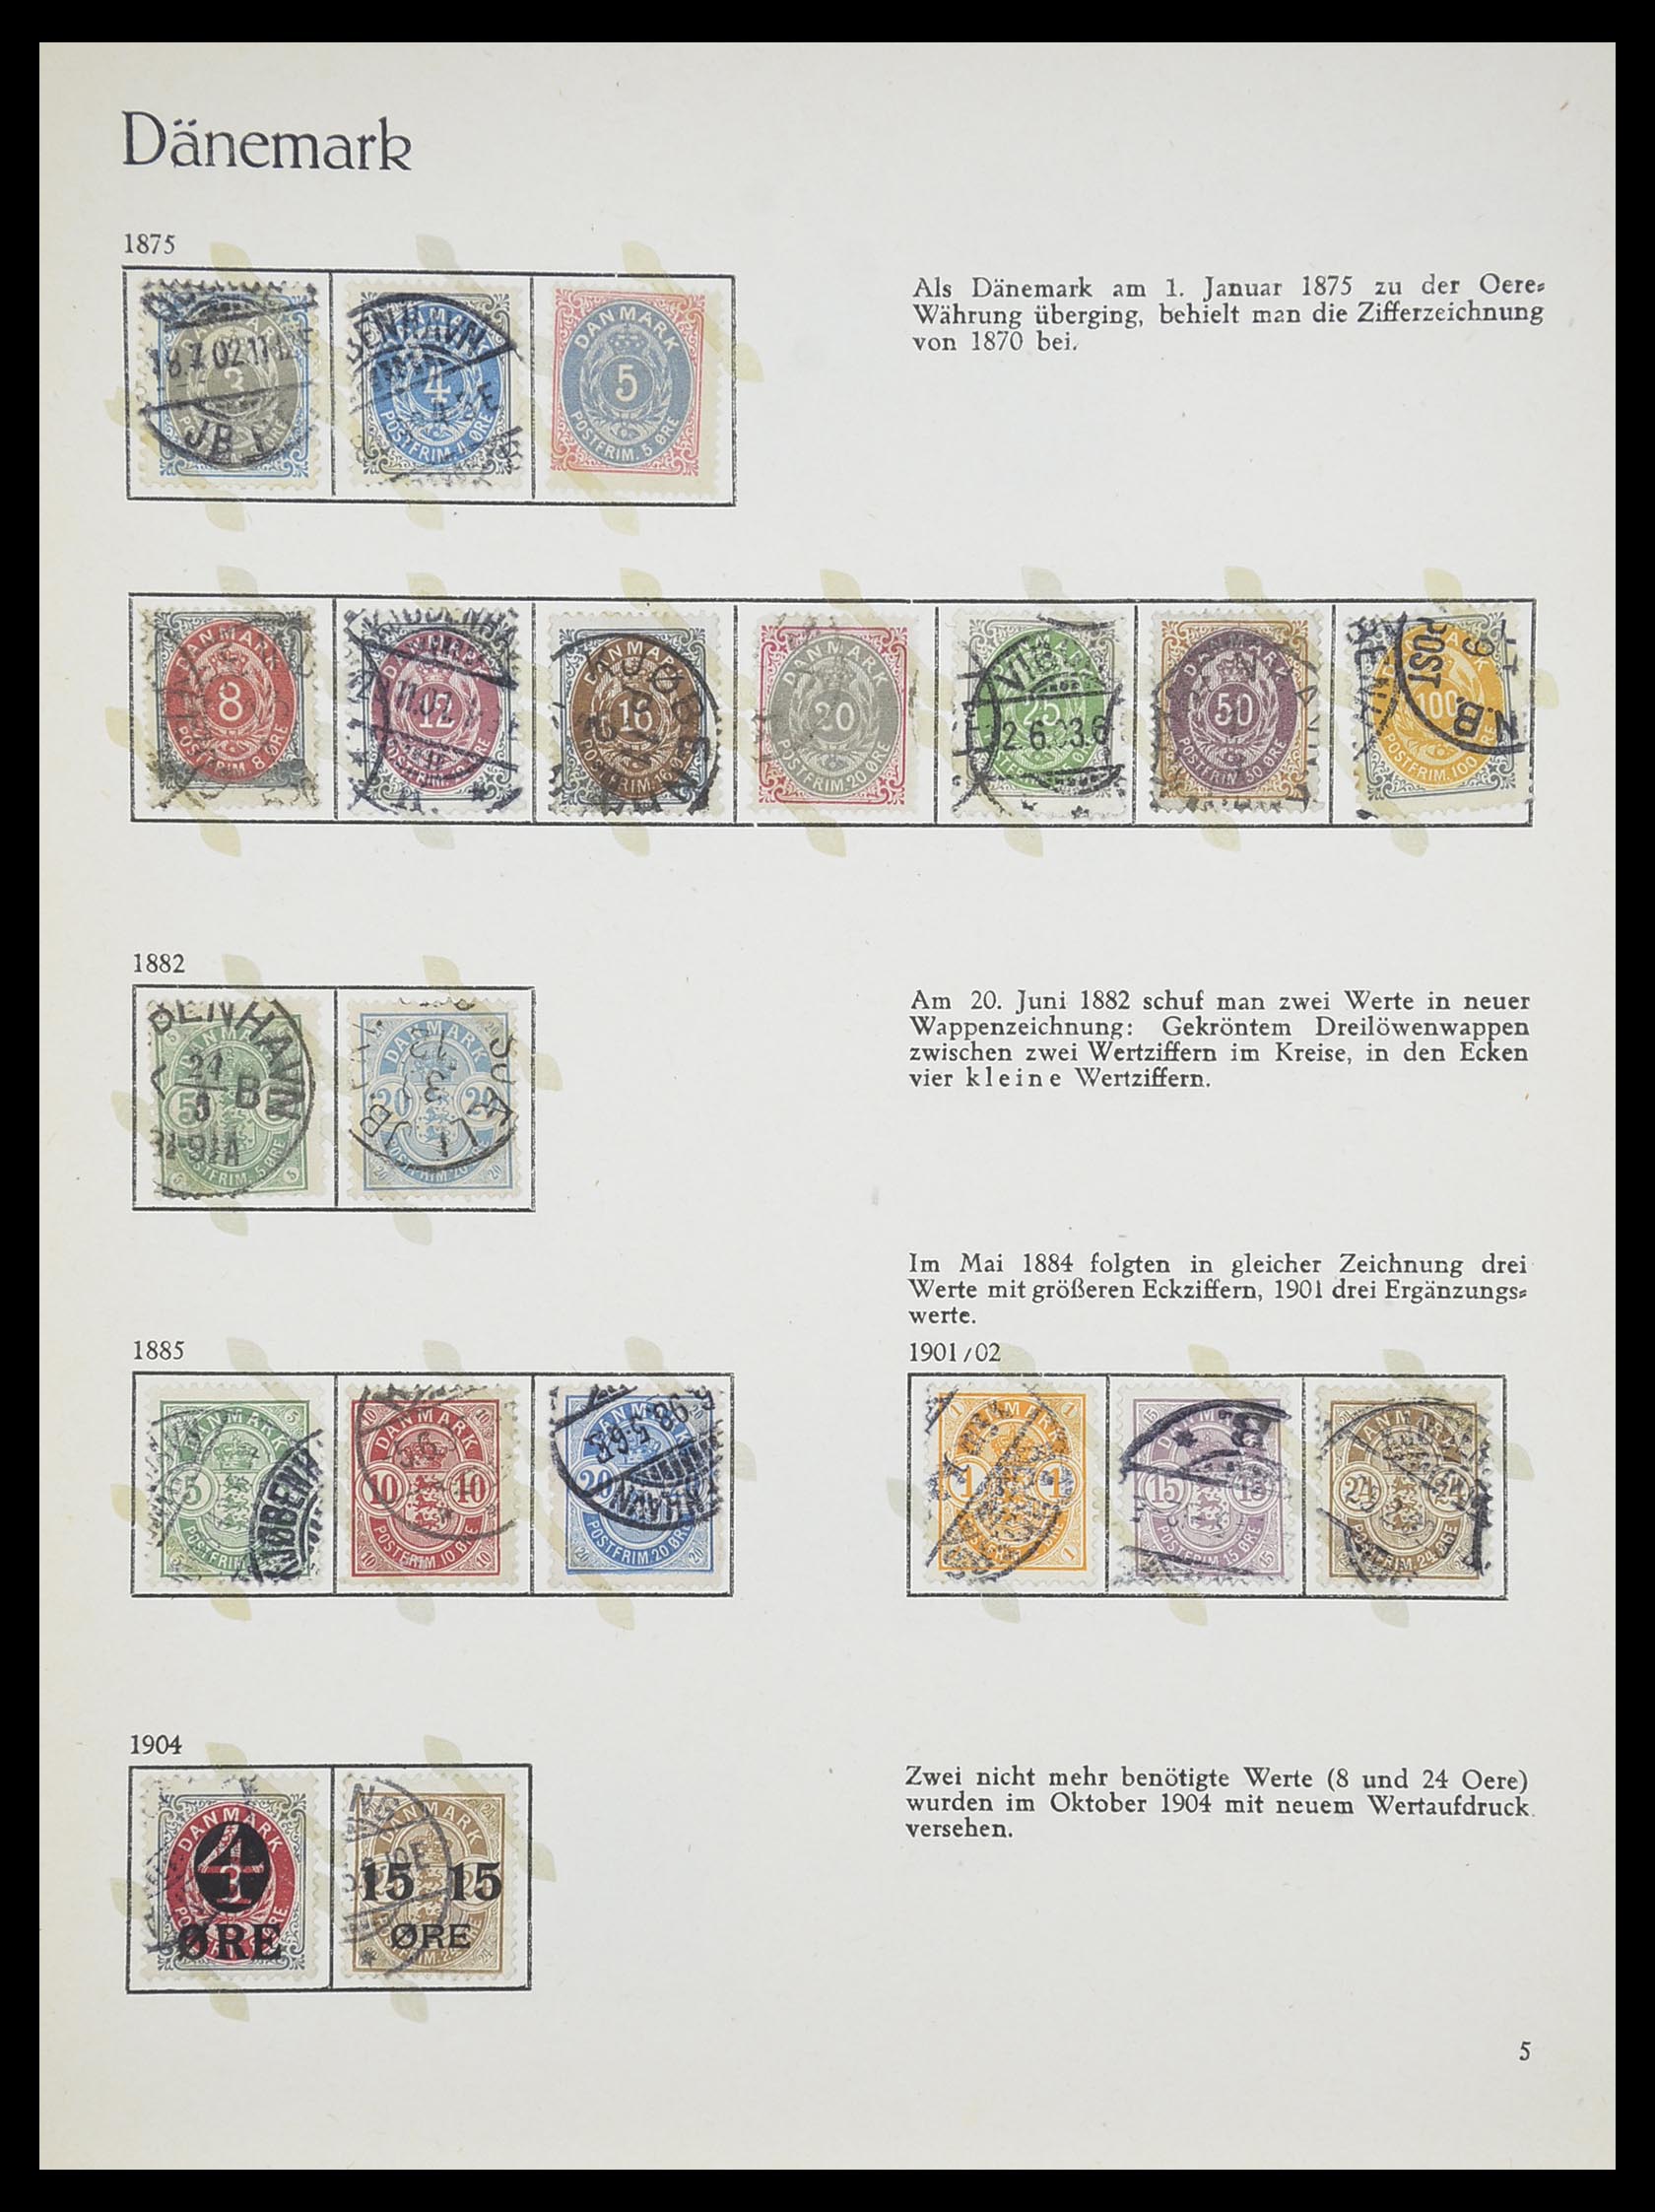 33708 002 - Stamp collection 33708 Denmark 1851-1970.